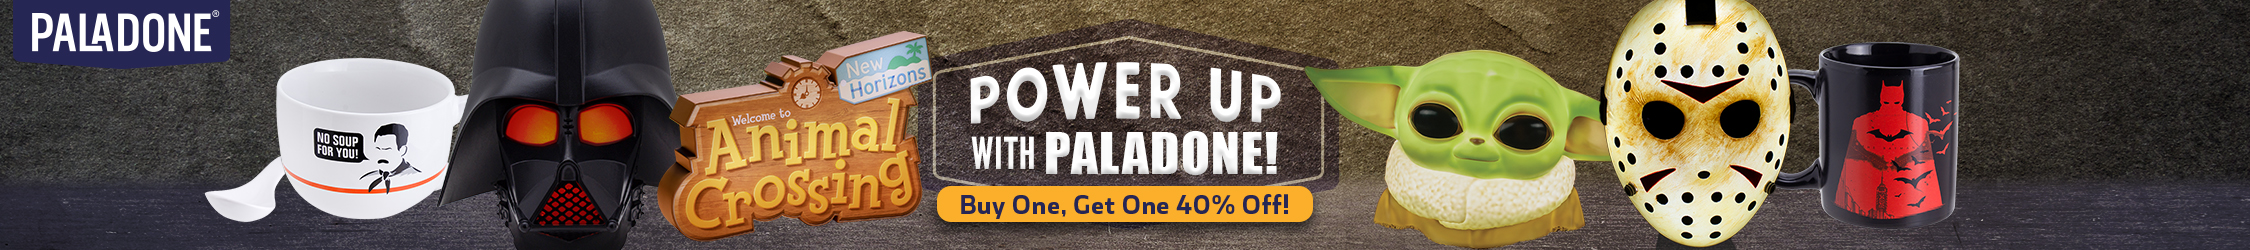 Buy One Get One 40% Off on Paladone